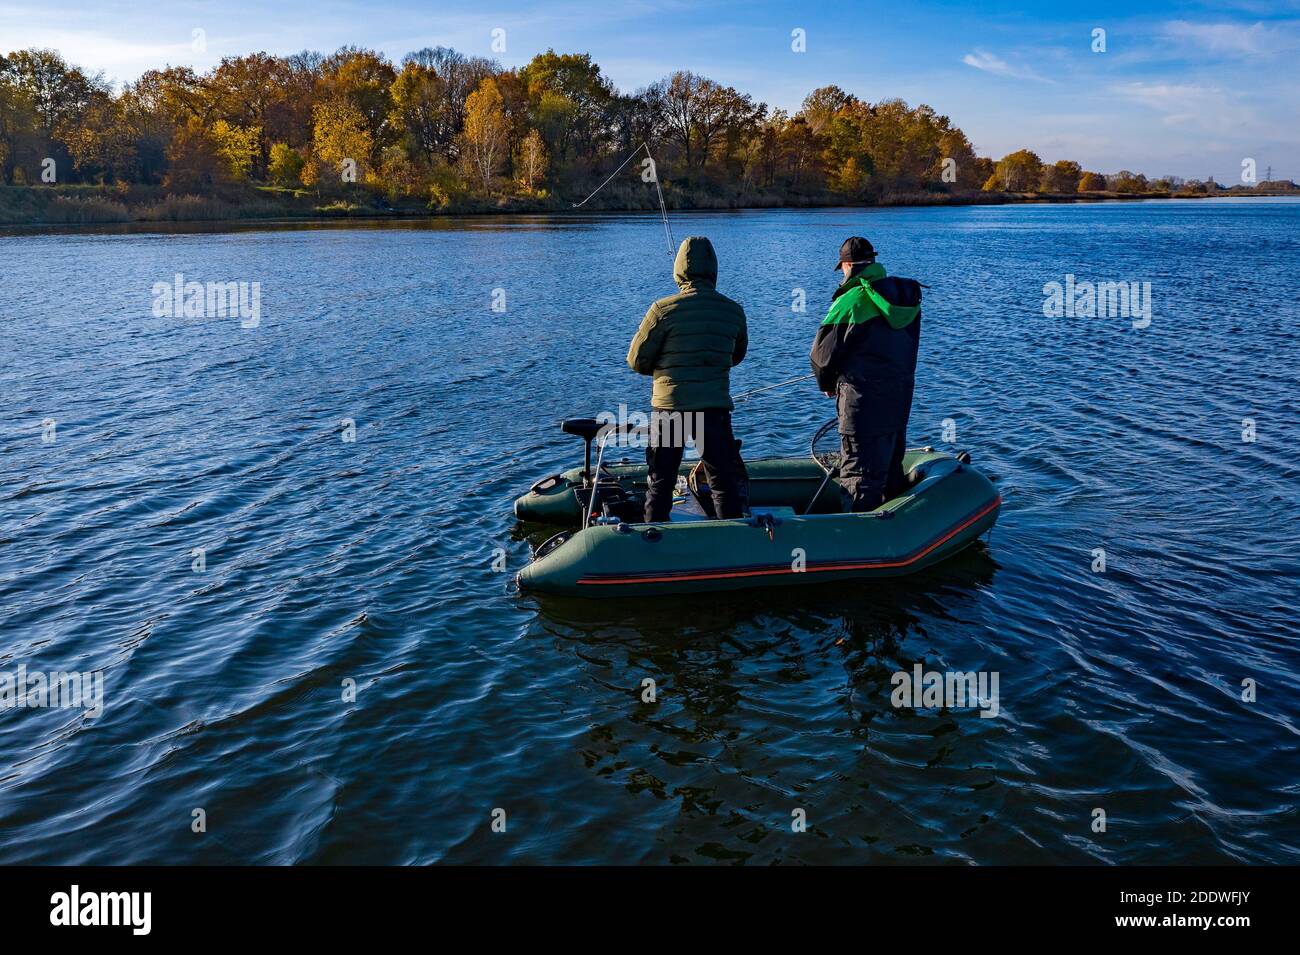 https://c8.alamy.com/comp/2DDWFJY/men-are-fishing-on-the-lake-in-a-fishing-boat-2DDWFJY.jpg